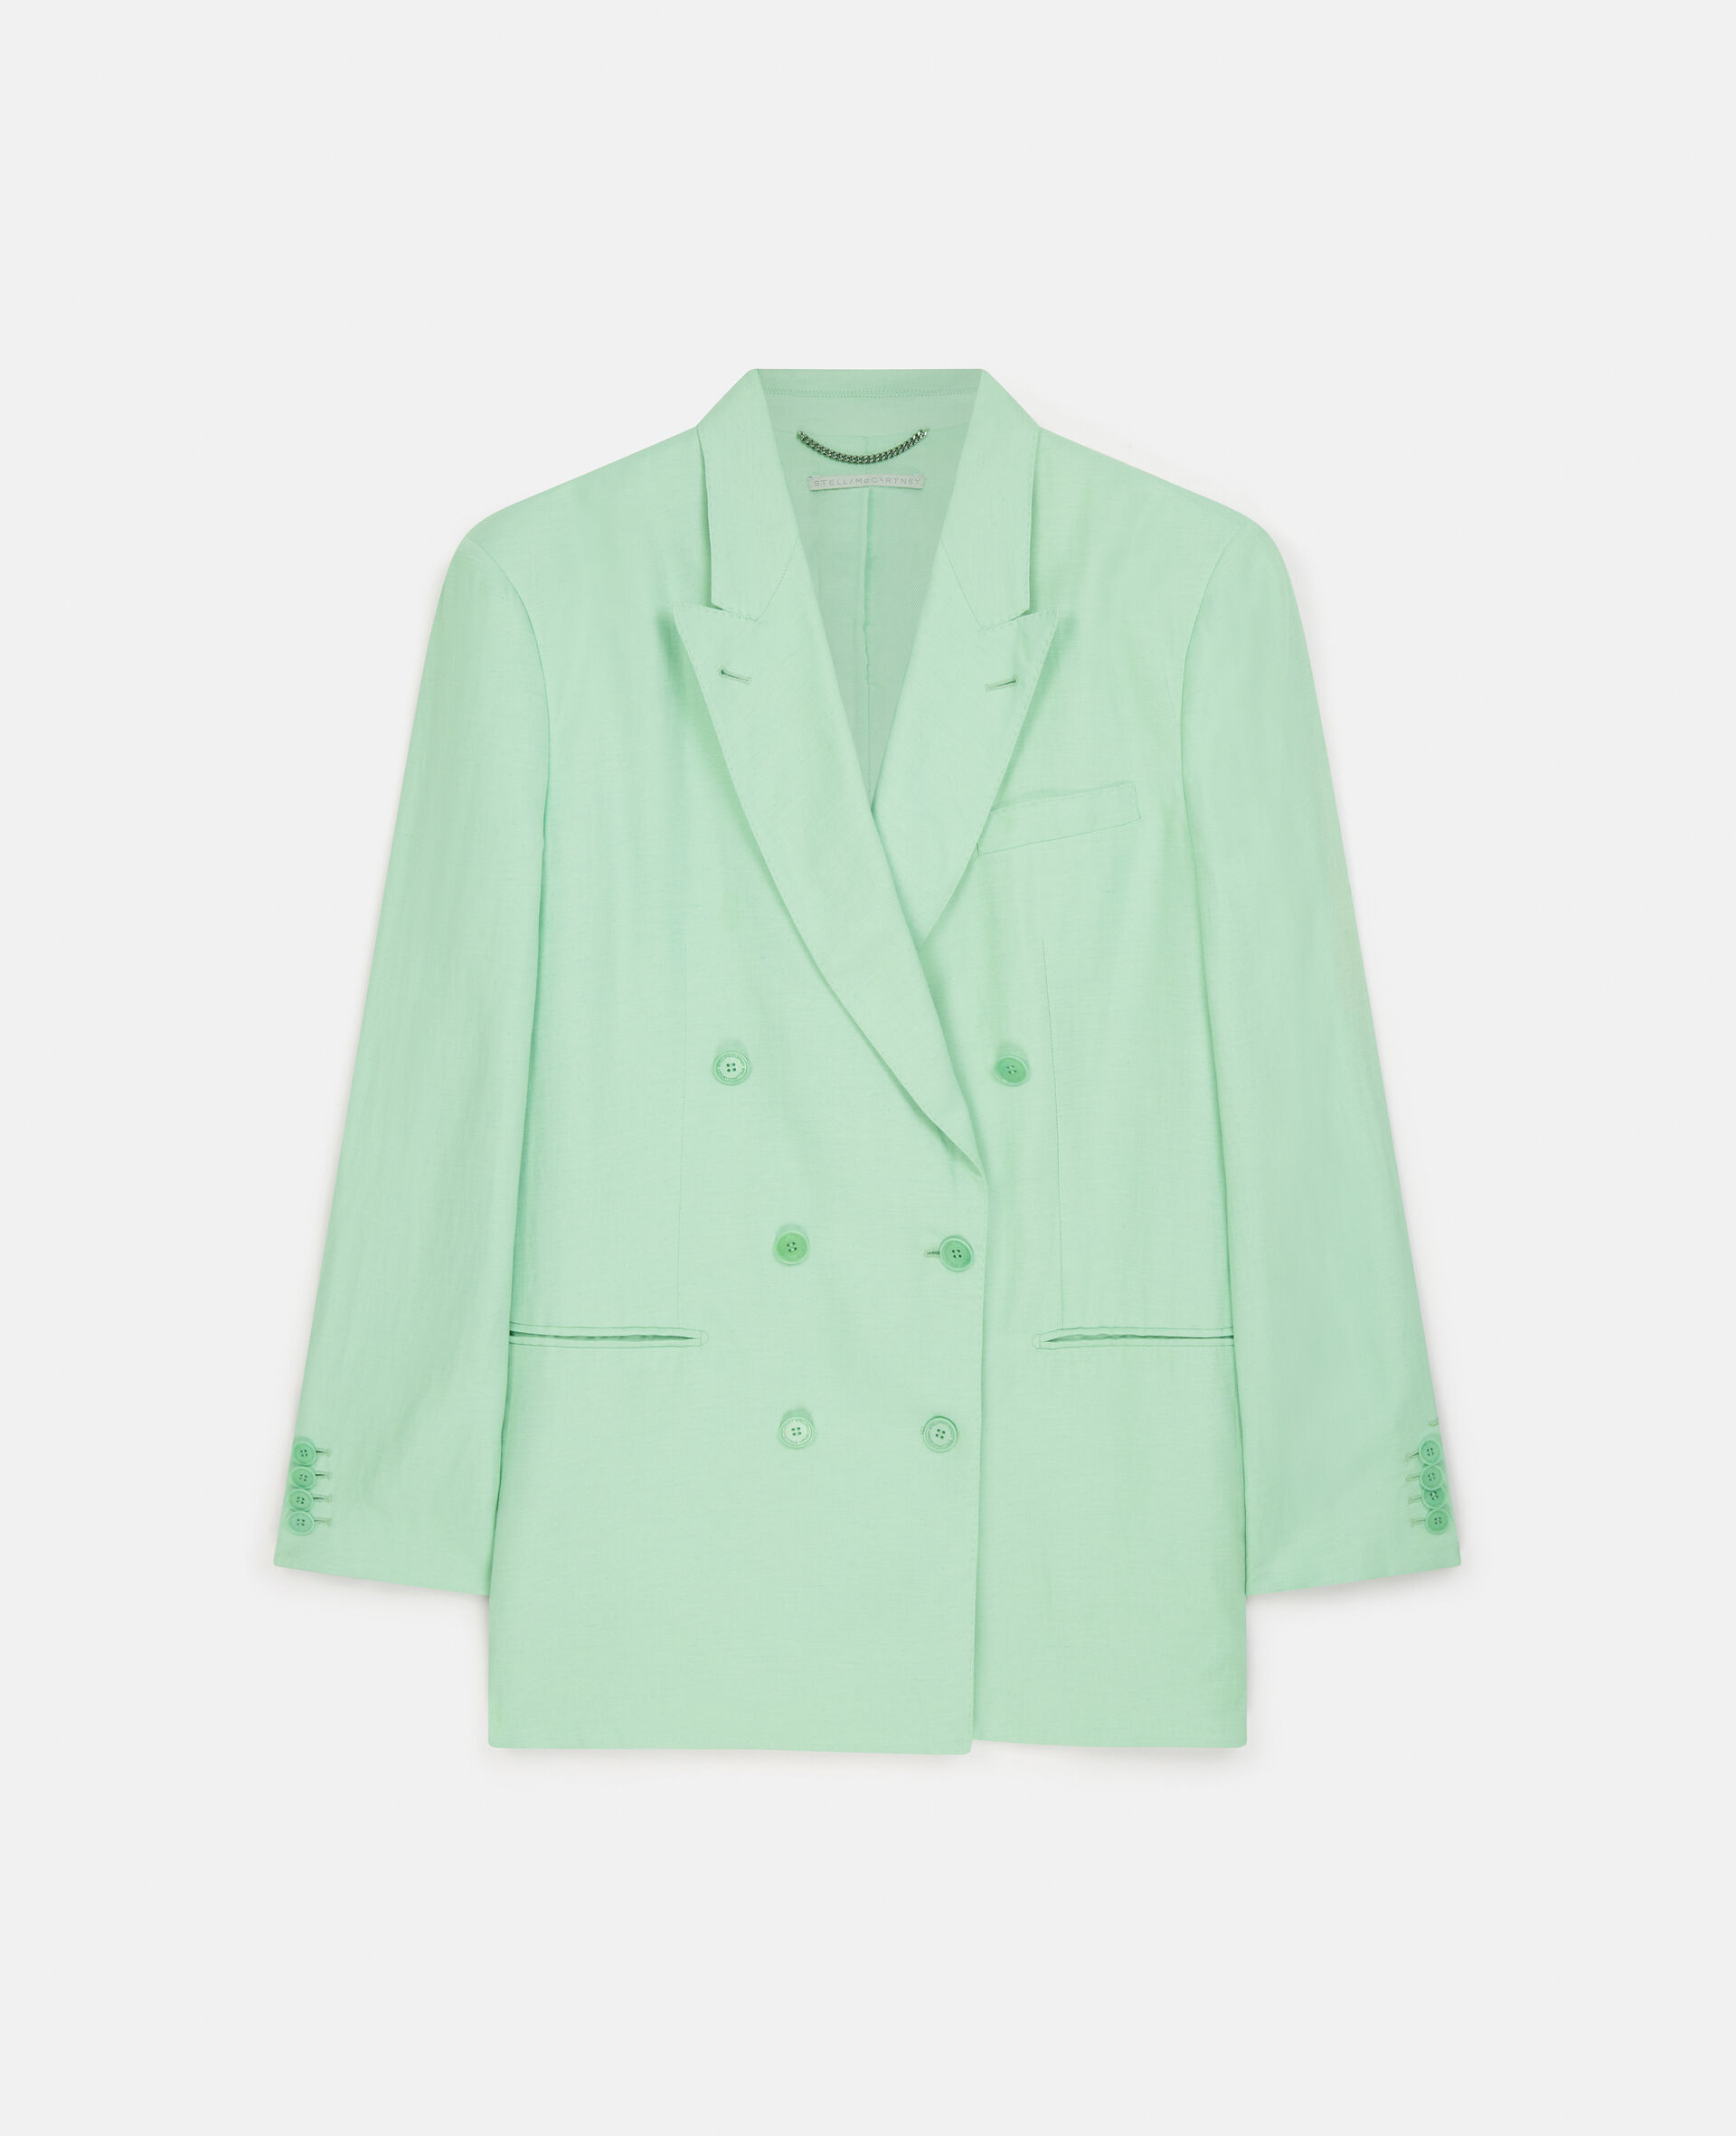 Oversized Double-Breasted Blazer-Green-large image number 0